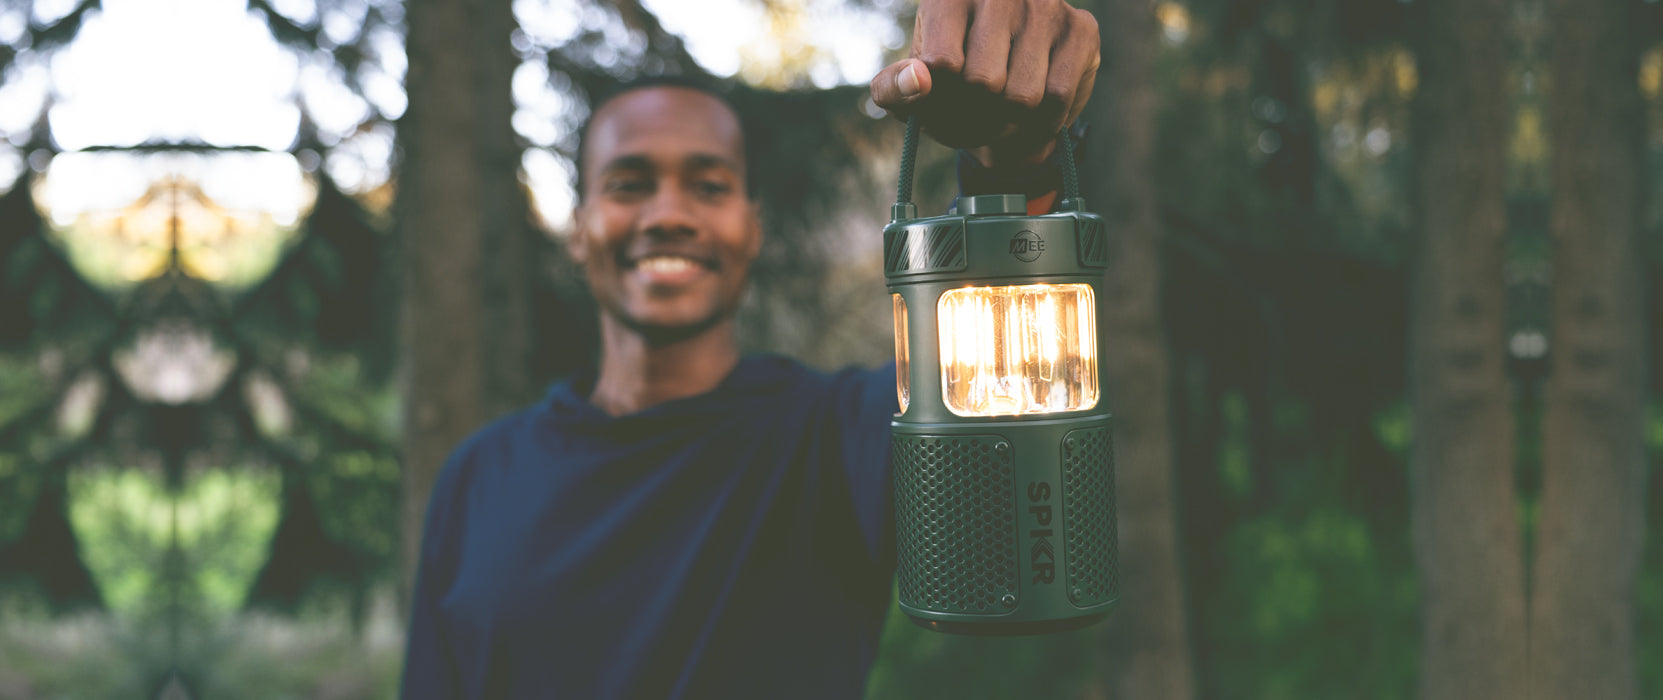 A man smiling in a forest, holding a lit lantern closely towards the camera. the background is softly blurred with green trees and sunlight filtering through.